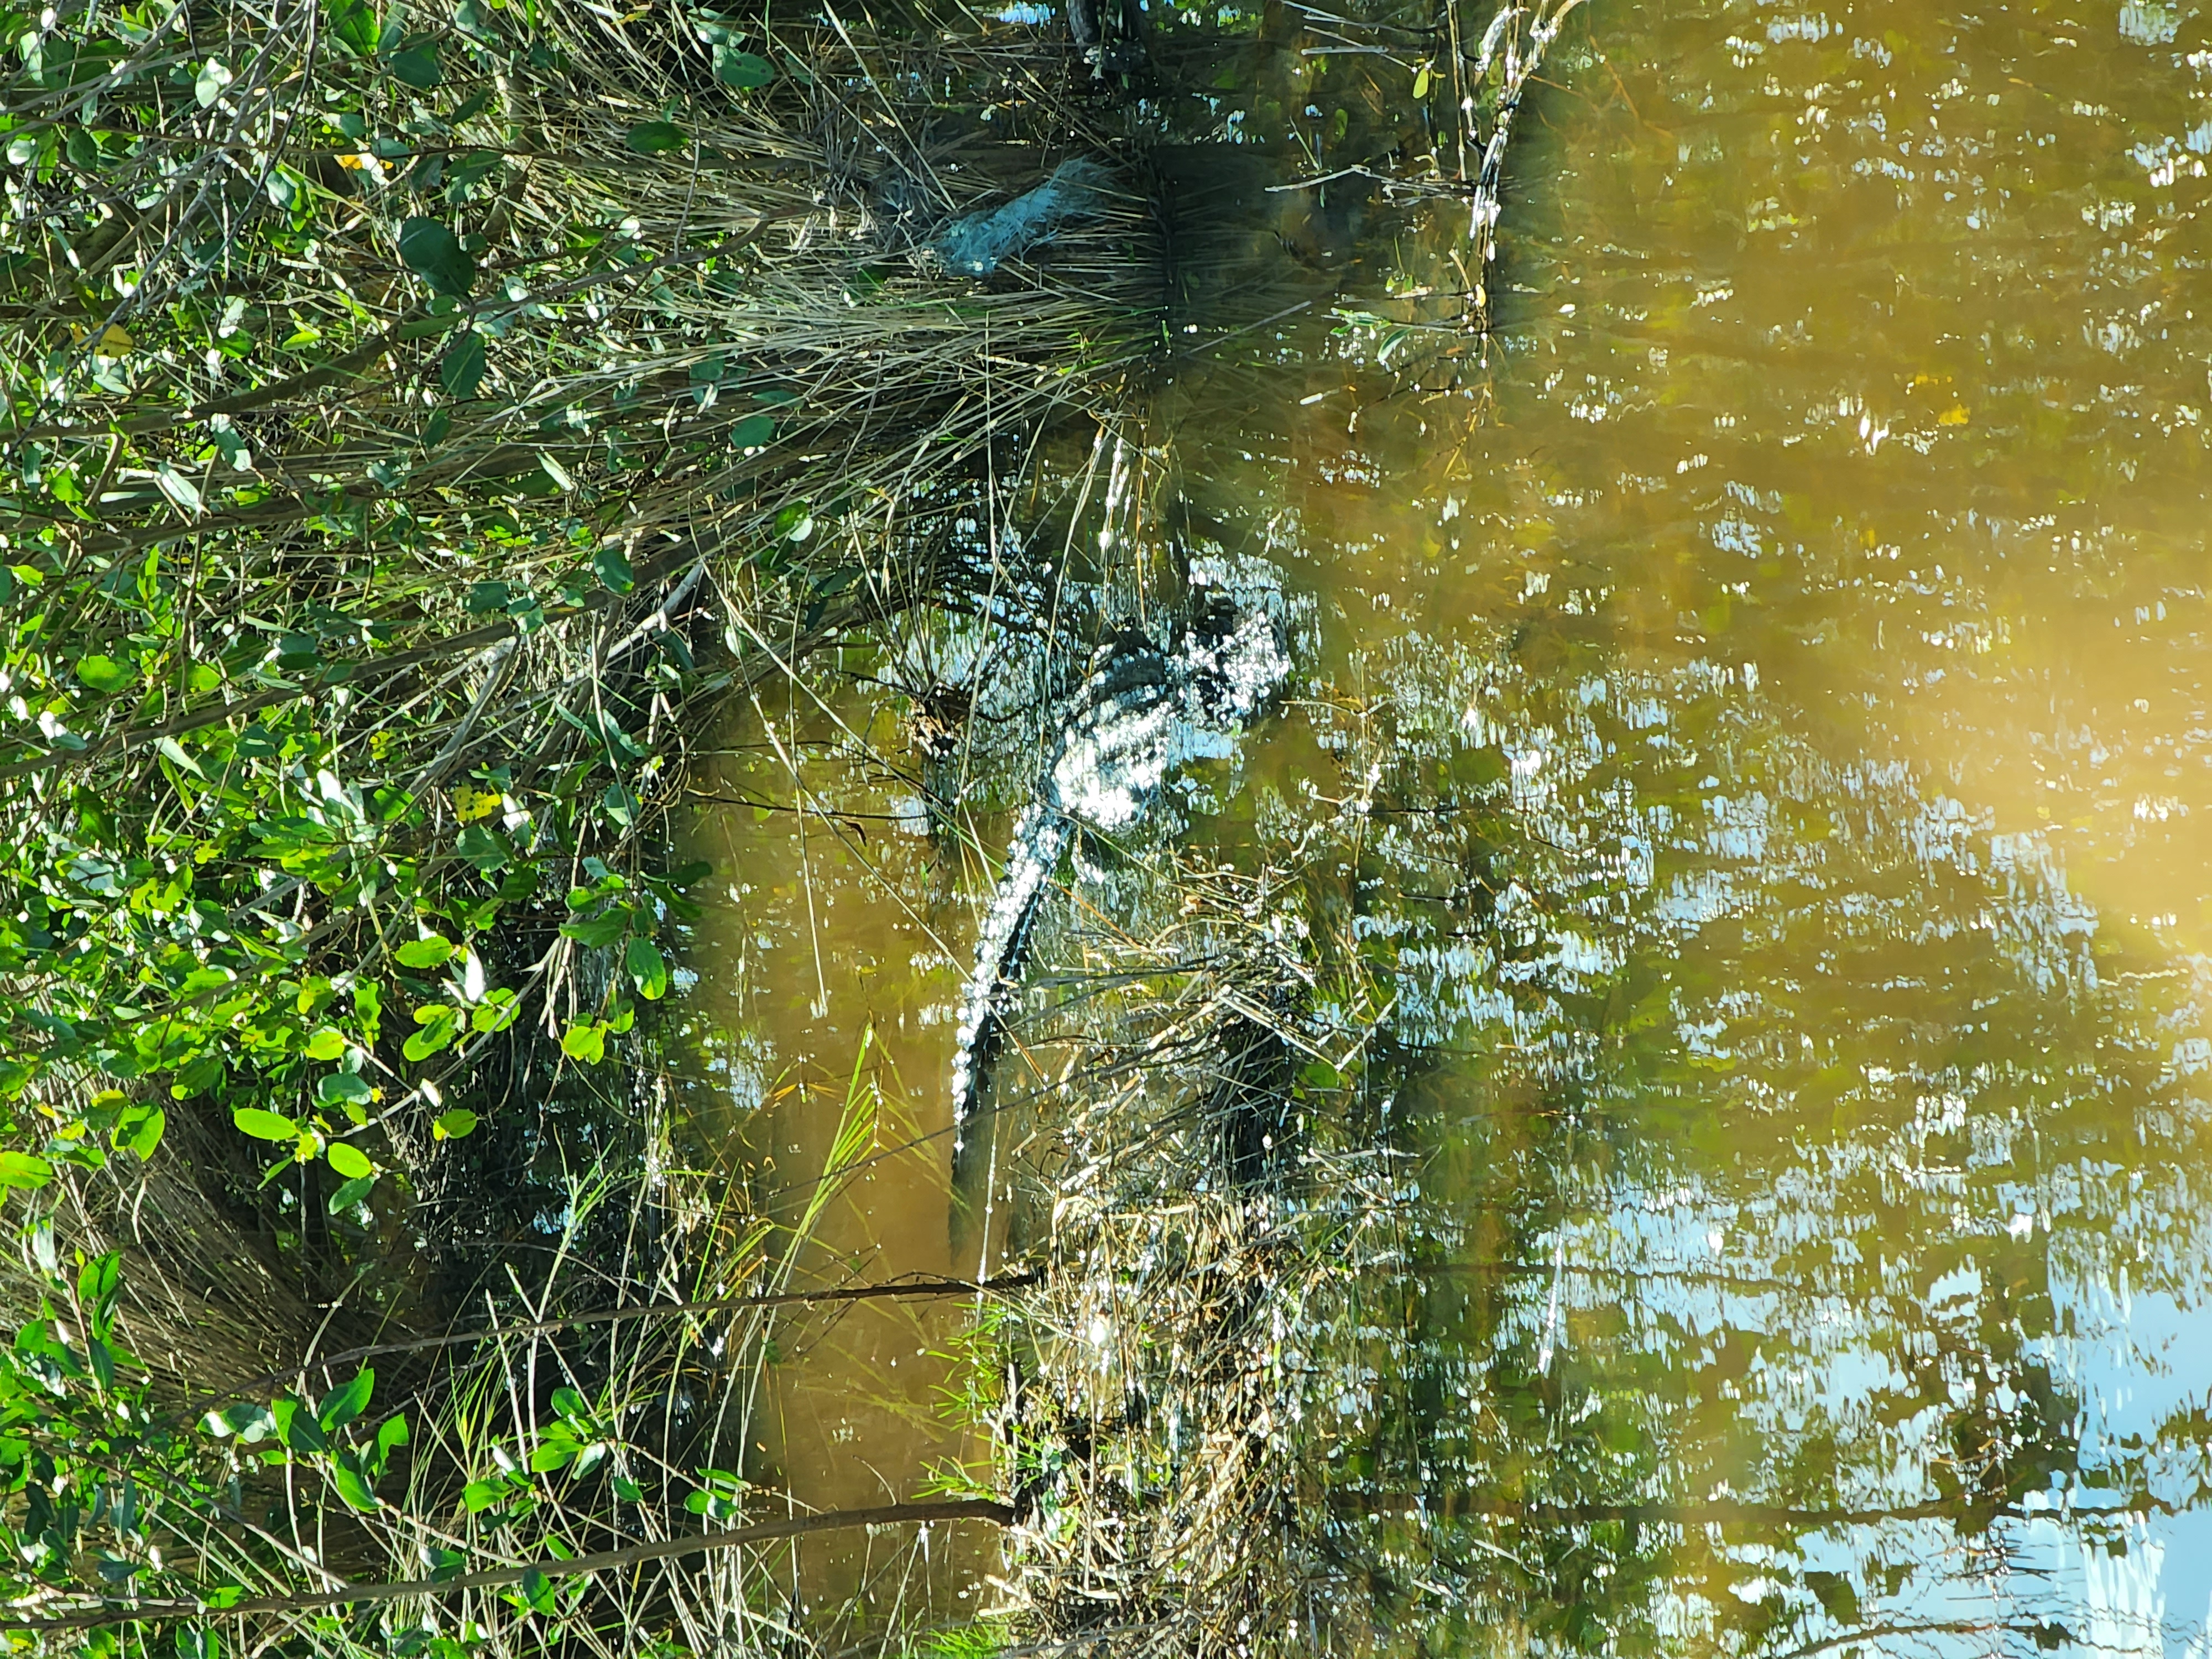 An alligator in a very green, swampy region in the Florida nature.